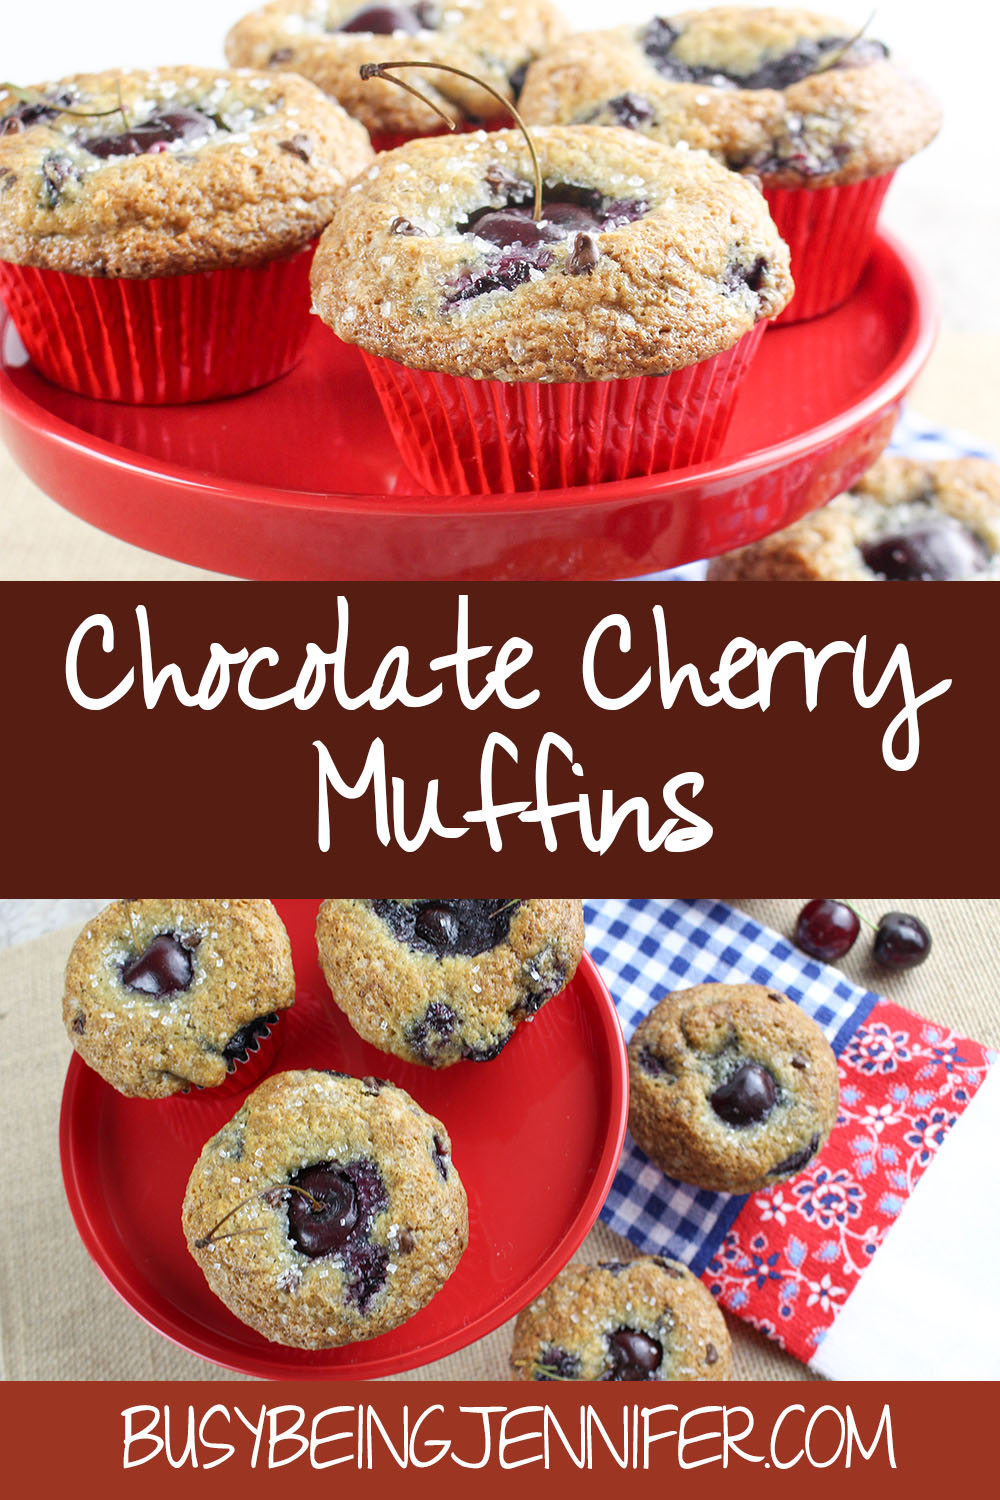 I needed a more decadent breakfast--a dessert for breakfast. And this recipe for Cherry Chocolate Muffins made all my dessert-breakfast dreams come true!